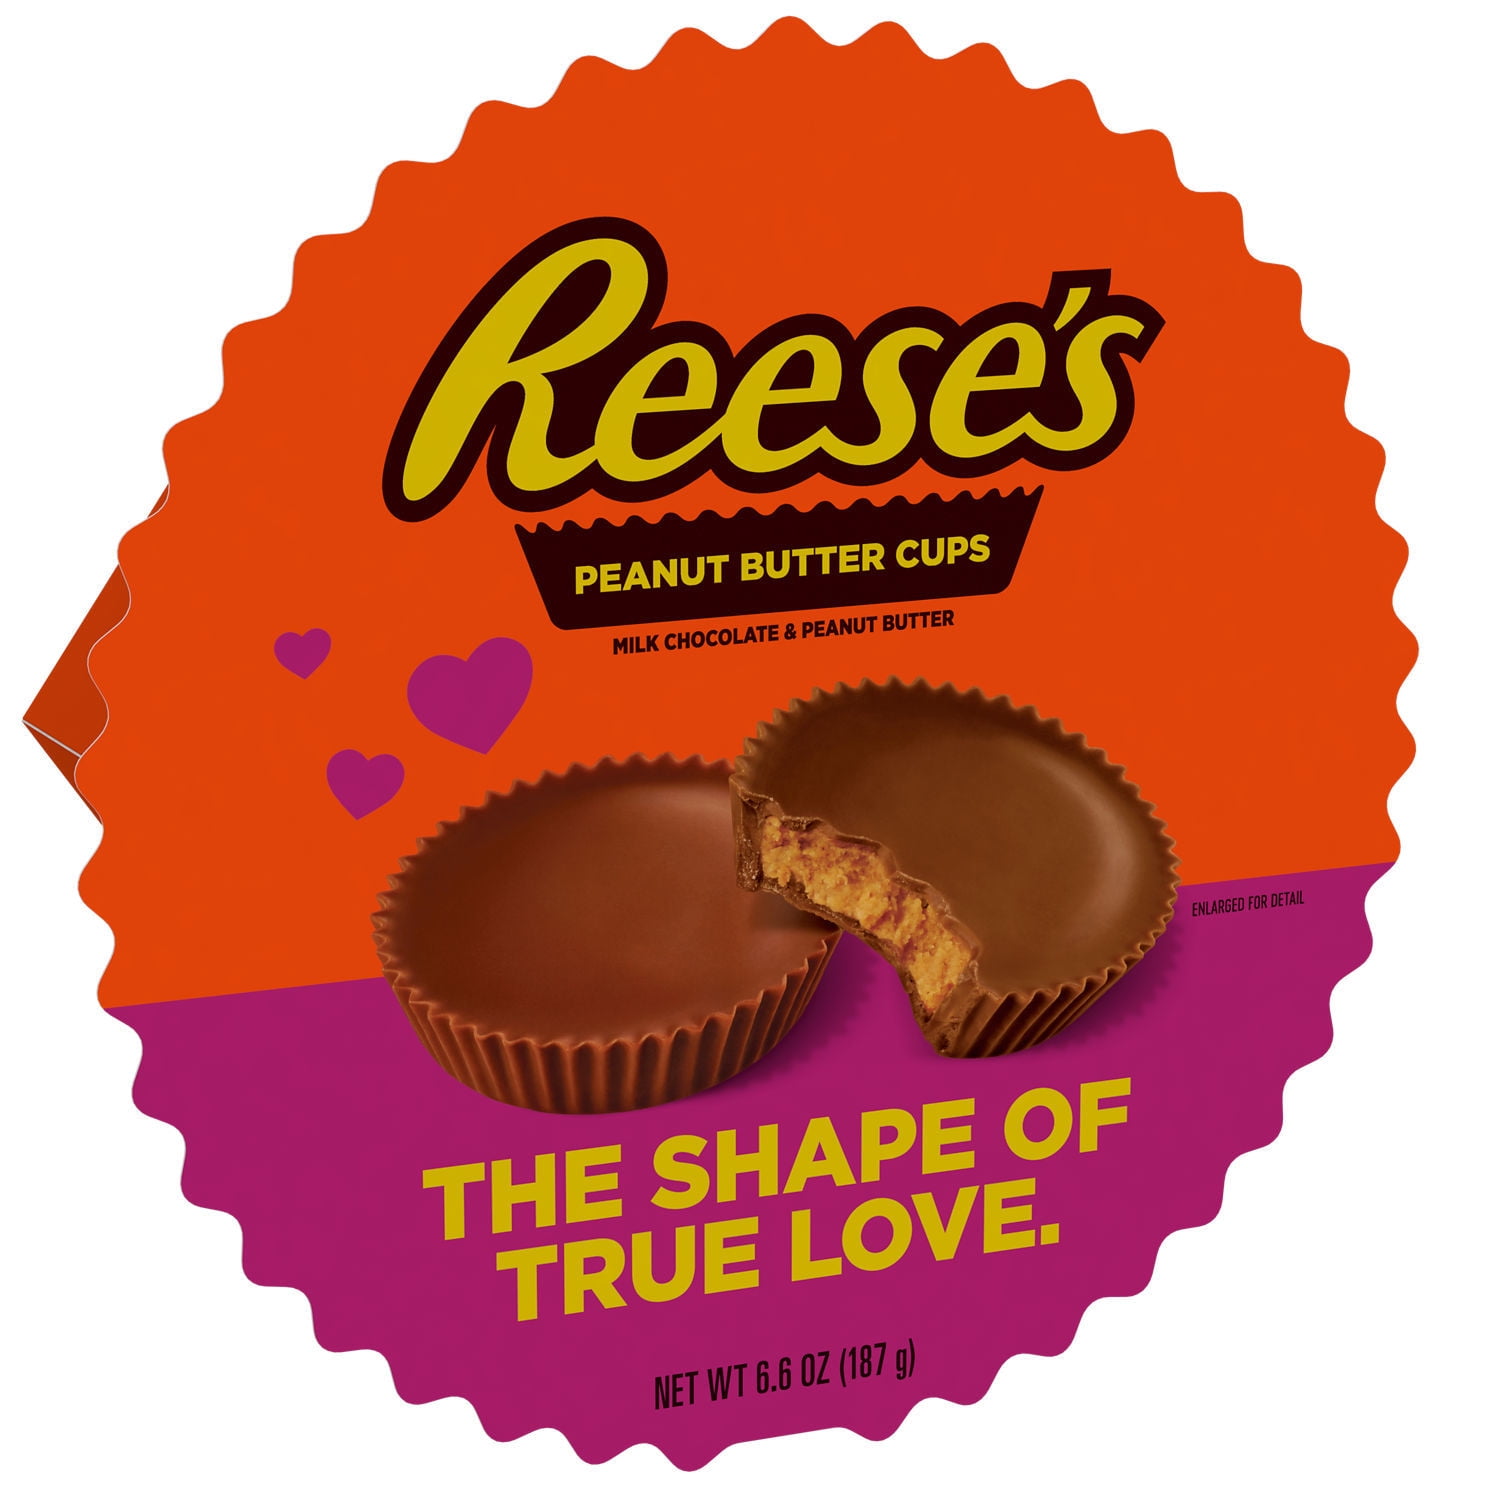 REESE'S, Milk Chocolate Peanut Butter Cups Candy, Valentine's Day, 6.6 oz, Gift Box